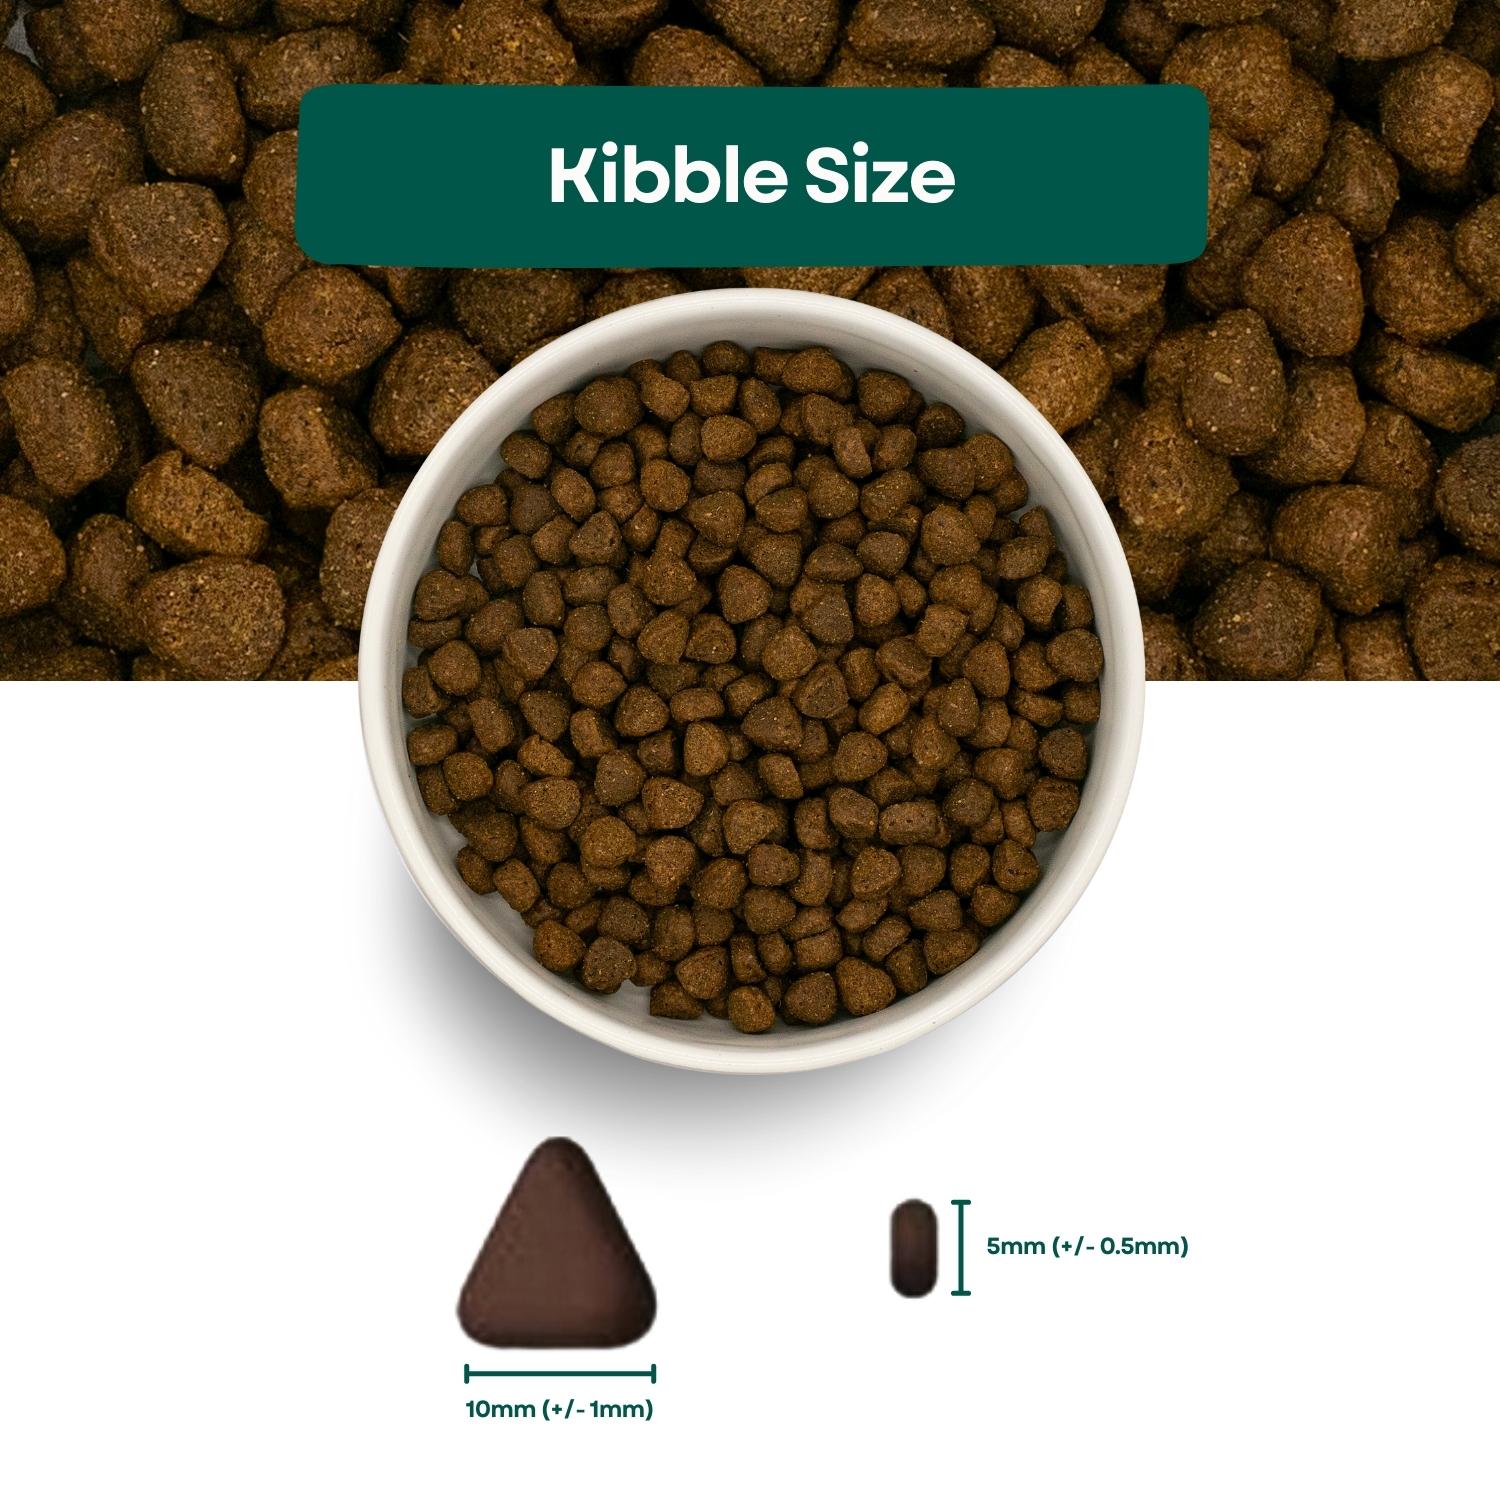 Kibble Size Superfood 65 Small Breed Adult Dog Food - Angus Beef